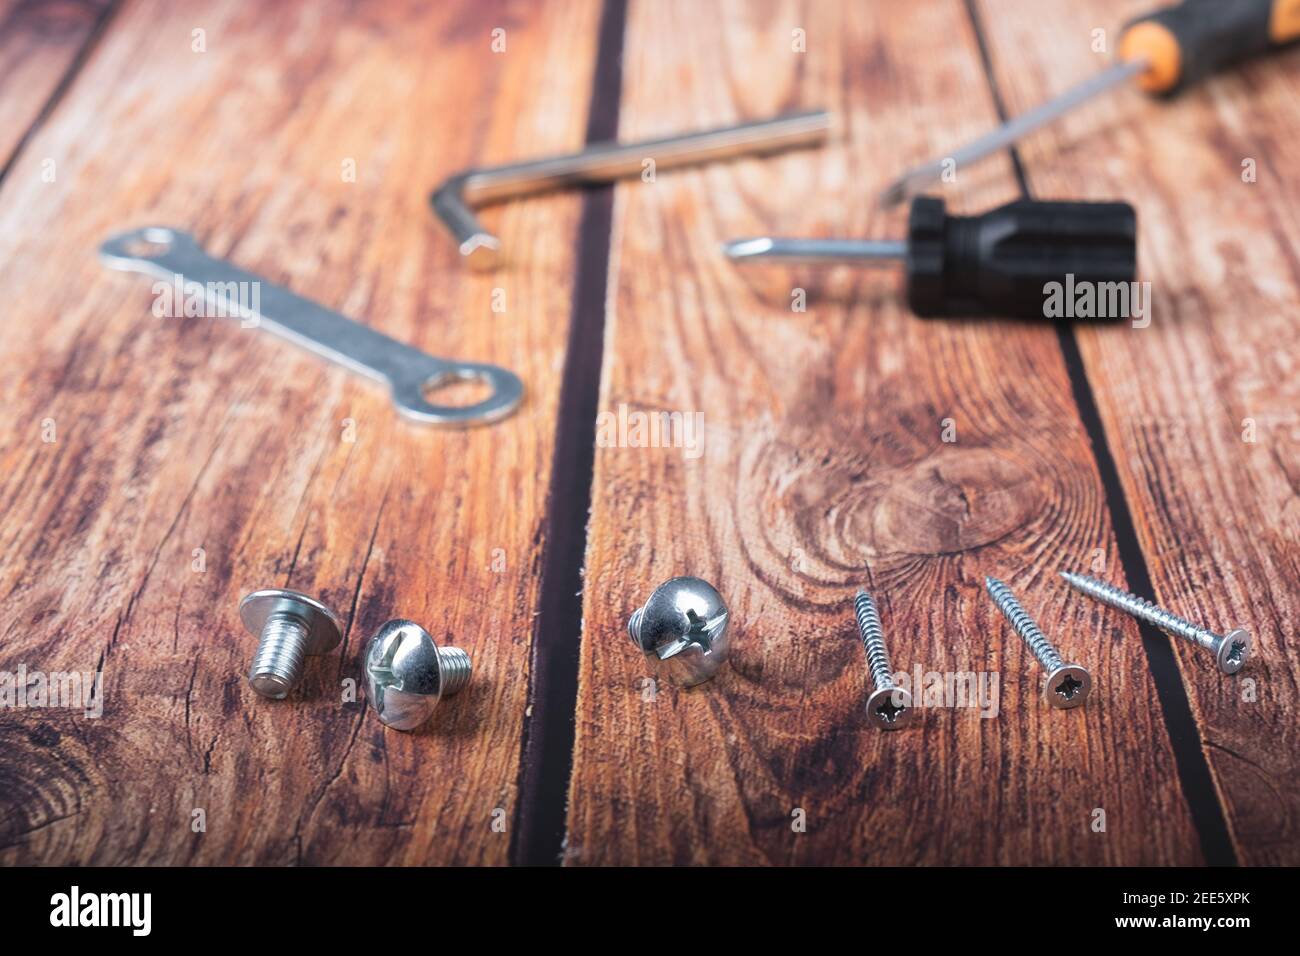 Screws of various sizes on a dark wood background Stock Photo